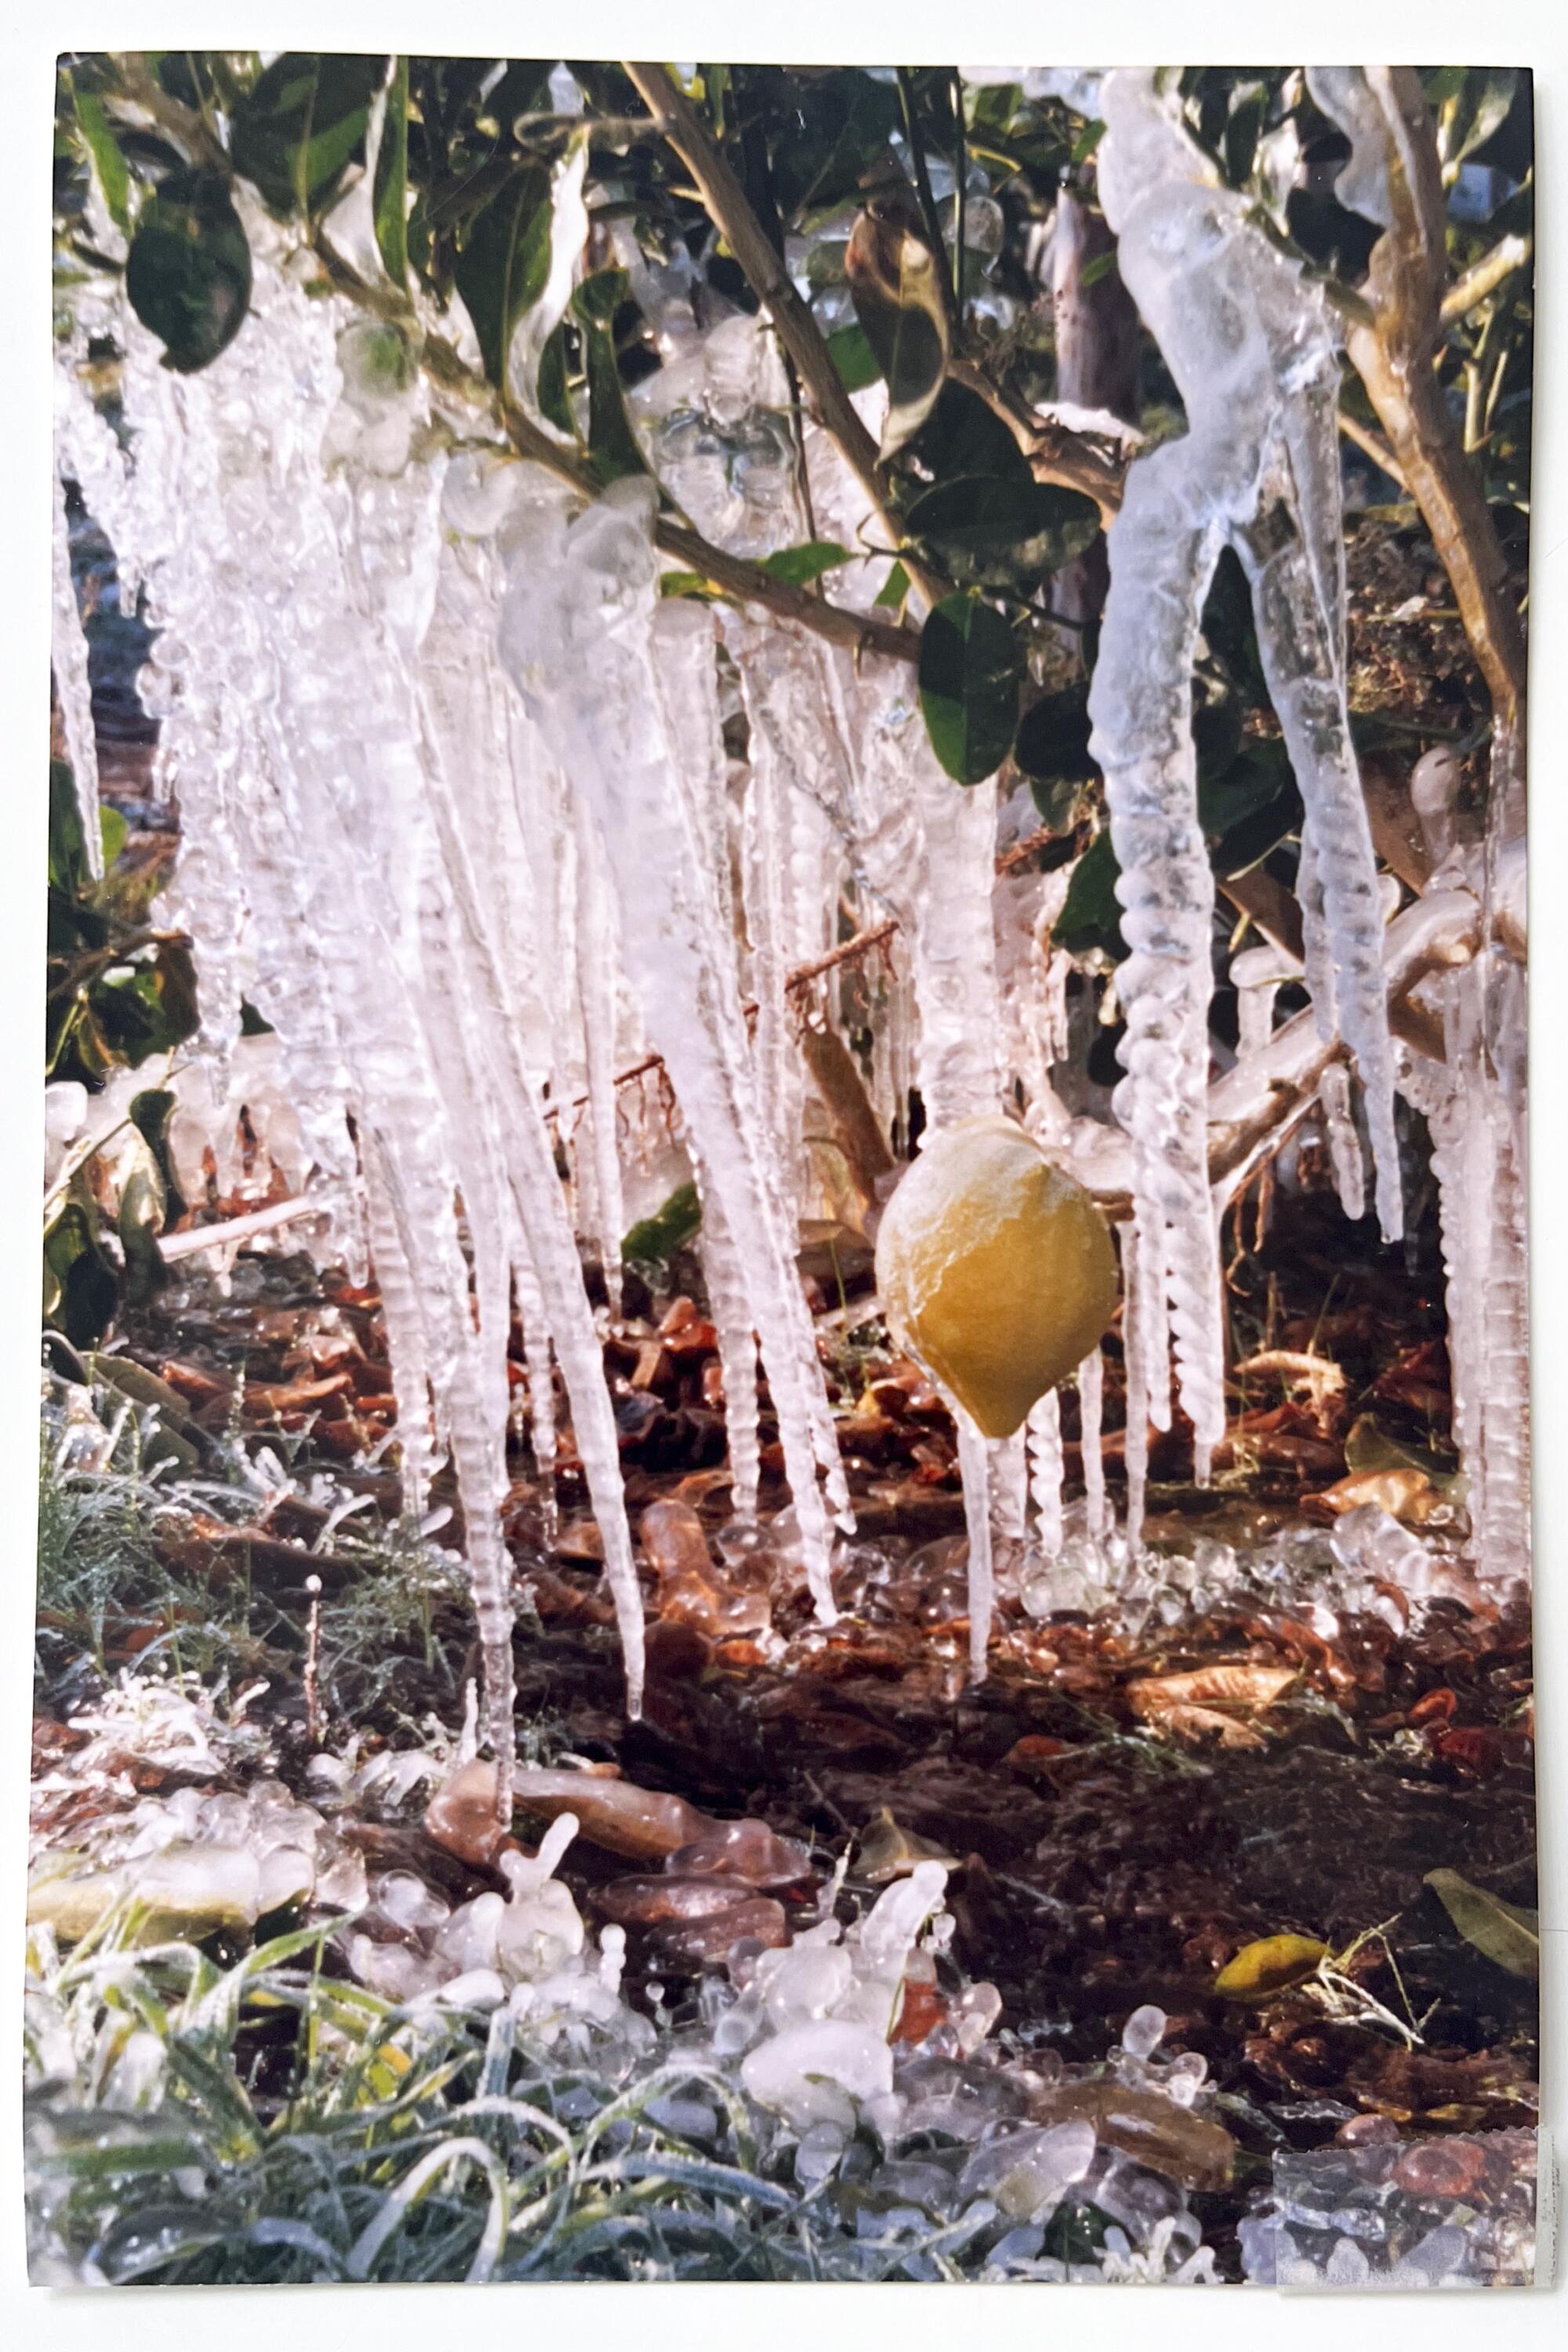 In 1990, a freeze destroyed the citron crop at Lindcove Ranch.